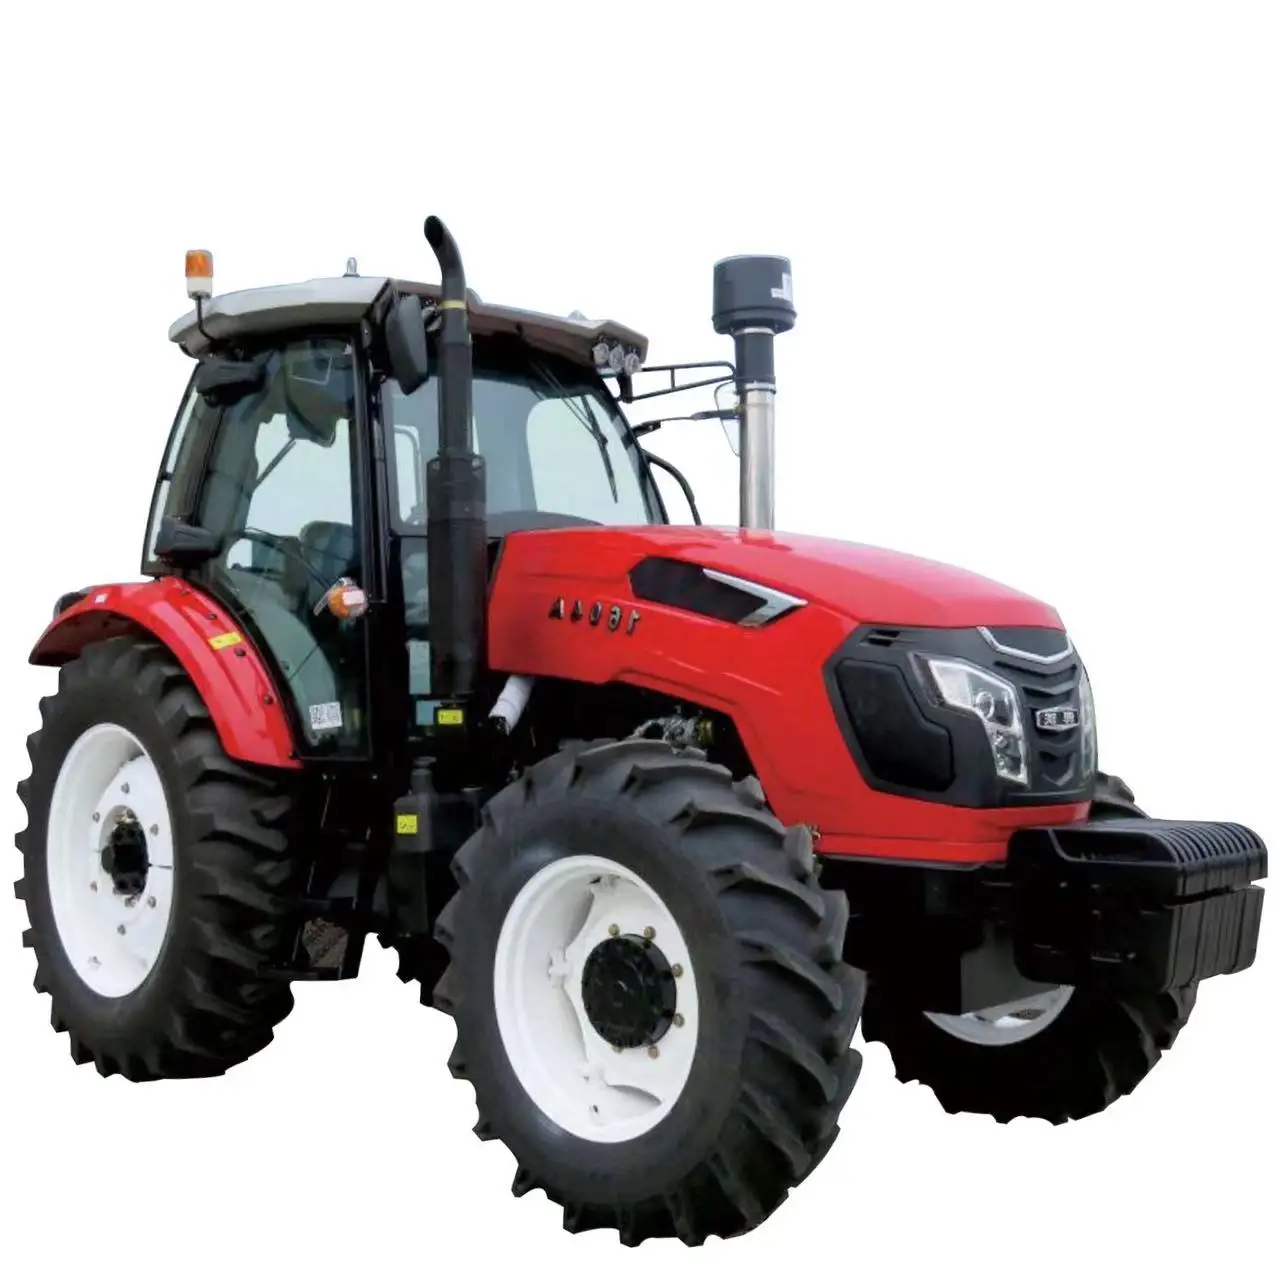 

tolcat Farming 25hp 30hp 35hp 50hp 60hp 70hp 80hp 90hp 100hp farmer agriculture 4x4 mini small 4 wheel agricultural tractor 4wd